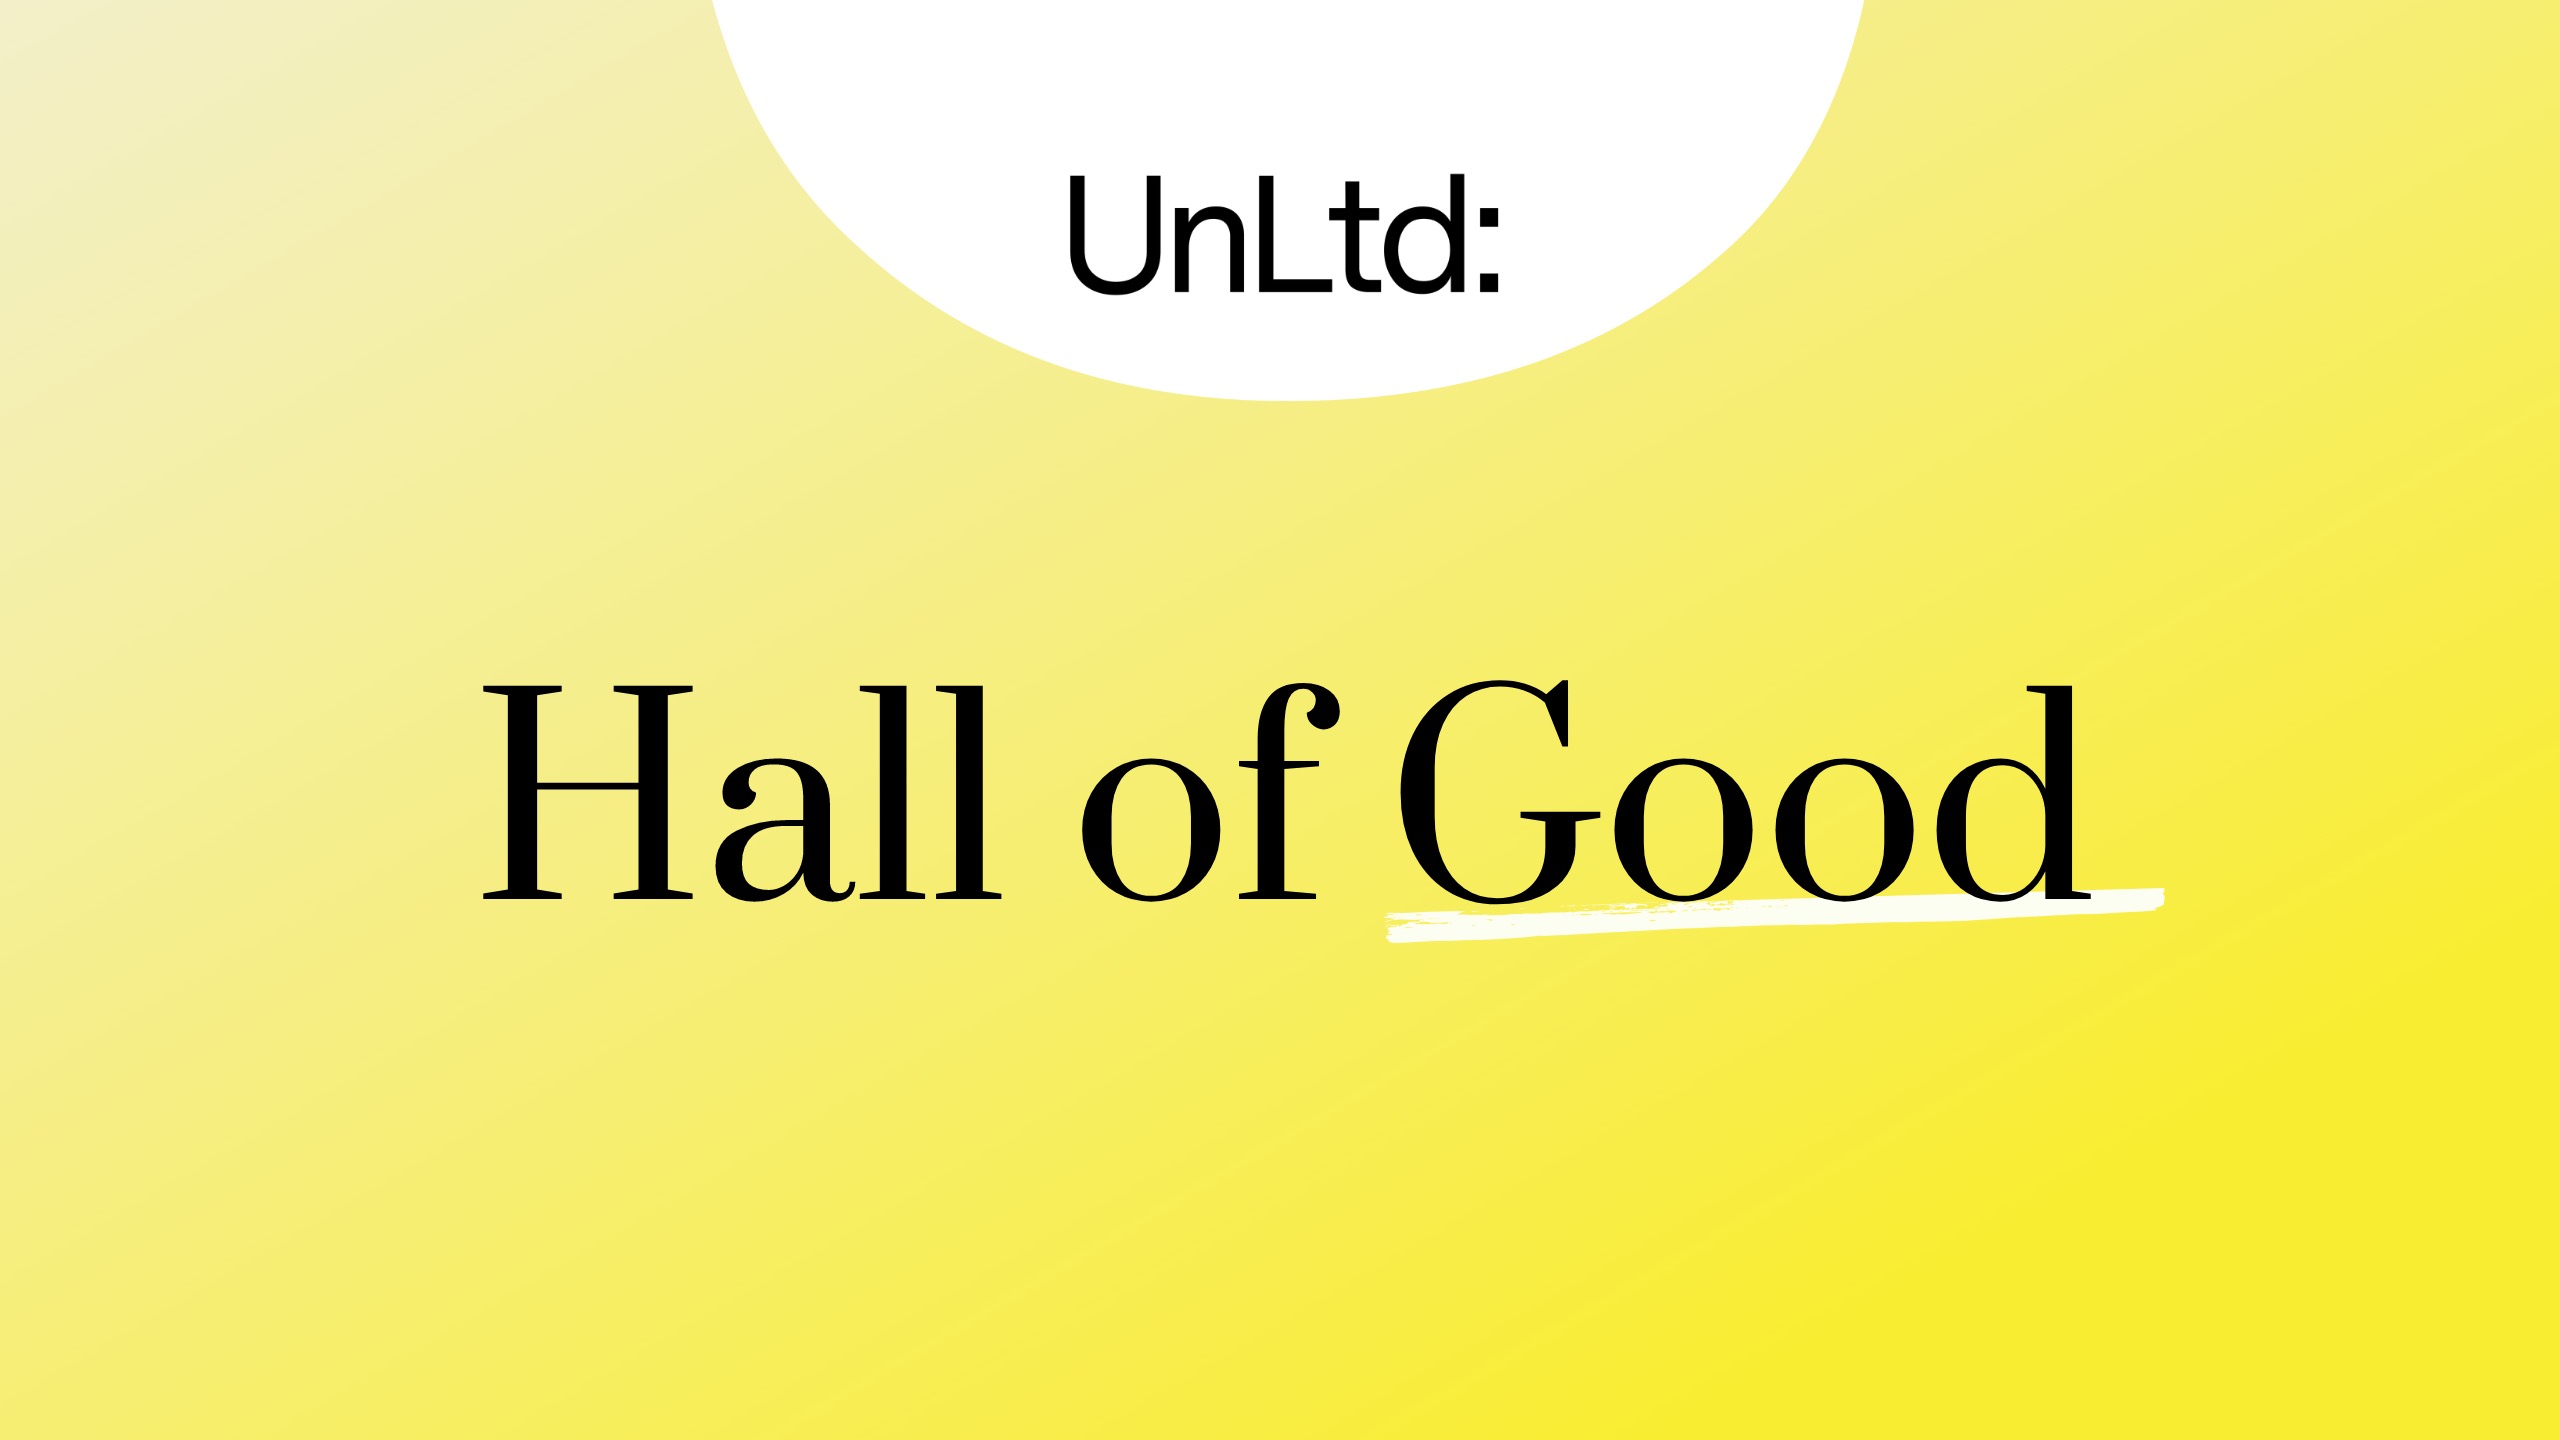 UnLtd: Hall of Good 2023 applications open to honour industry’s social impact